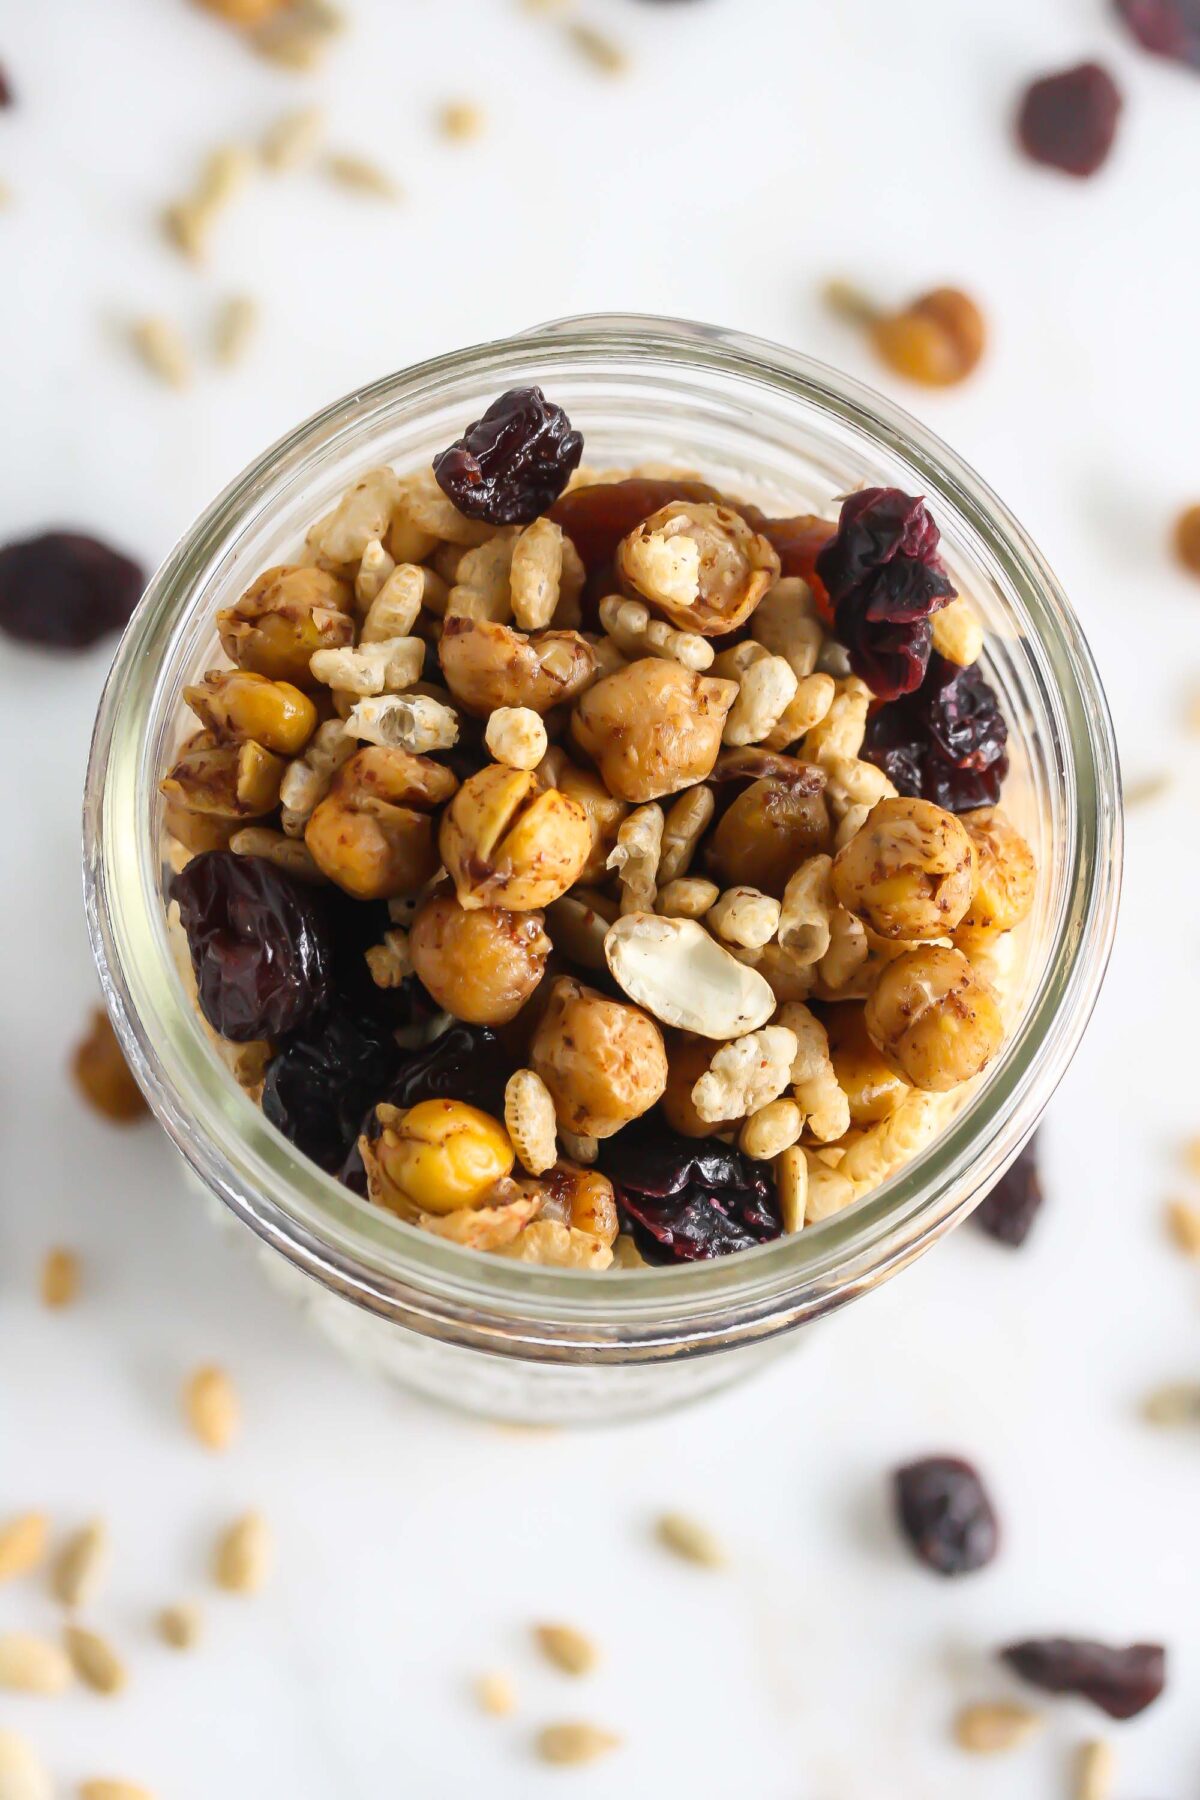 Roasted Chickpea Trail Mix is made with all wholesome ingredients and is the perfect on-the-go-snack! www.laurenkellynutrition.com